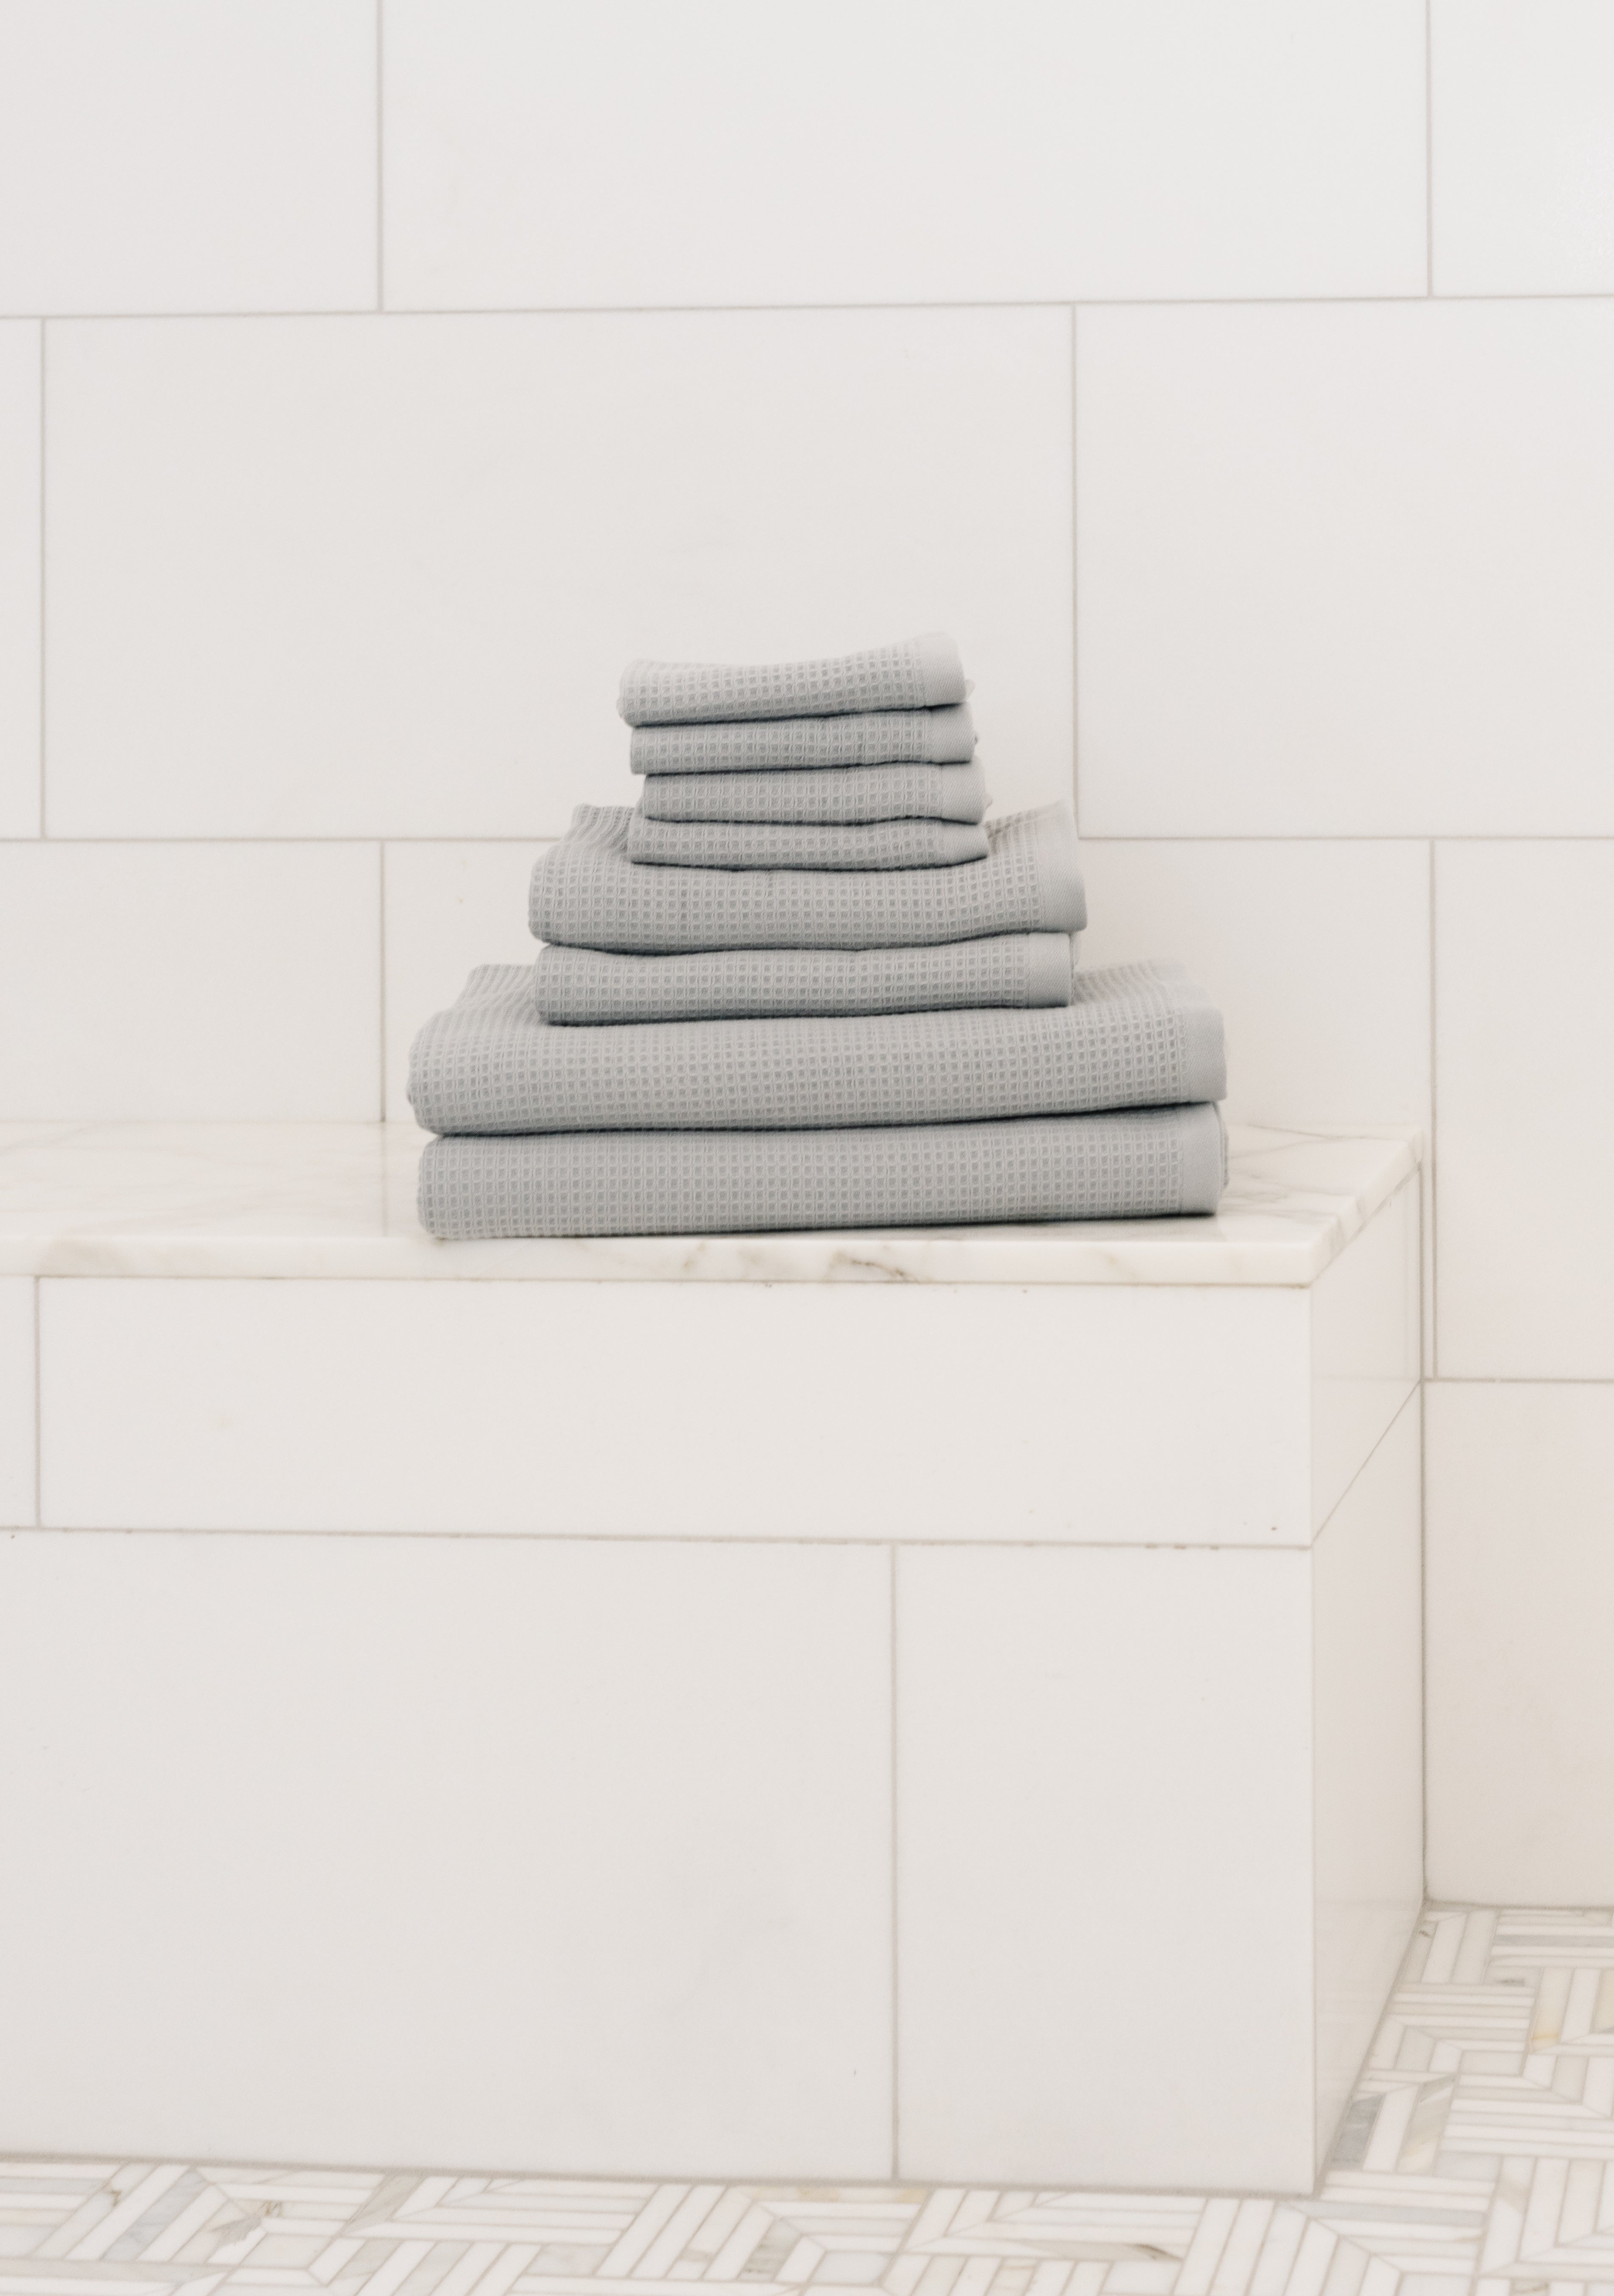 Waffle Bath Towel Set in the color Harbor Mist. Photo of Harbor Mist Waffle Bath Towel Set taken resting on a marble counter top. |Color:Harbor Mist